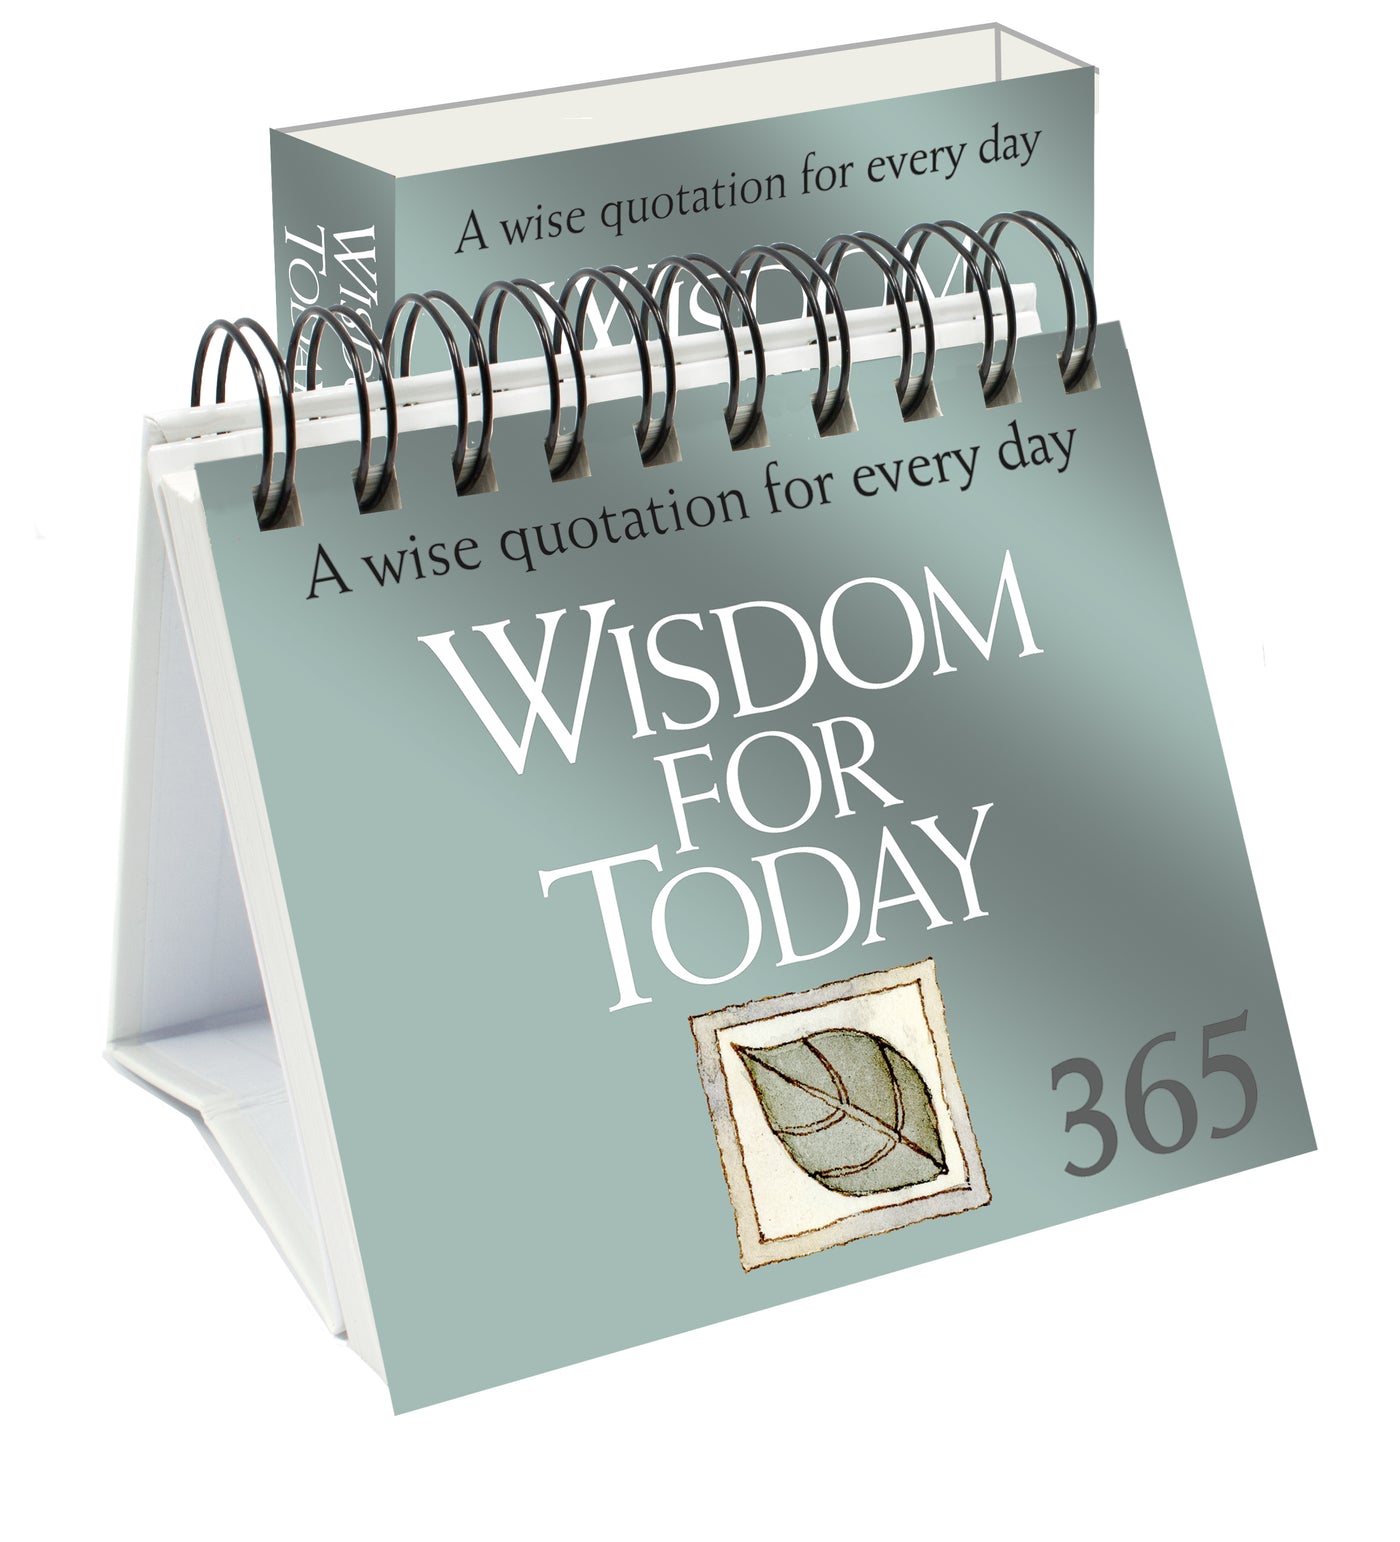 365 Wisdom for Today - A wise quotation for every day